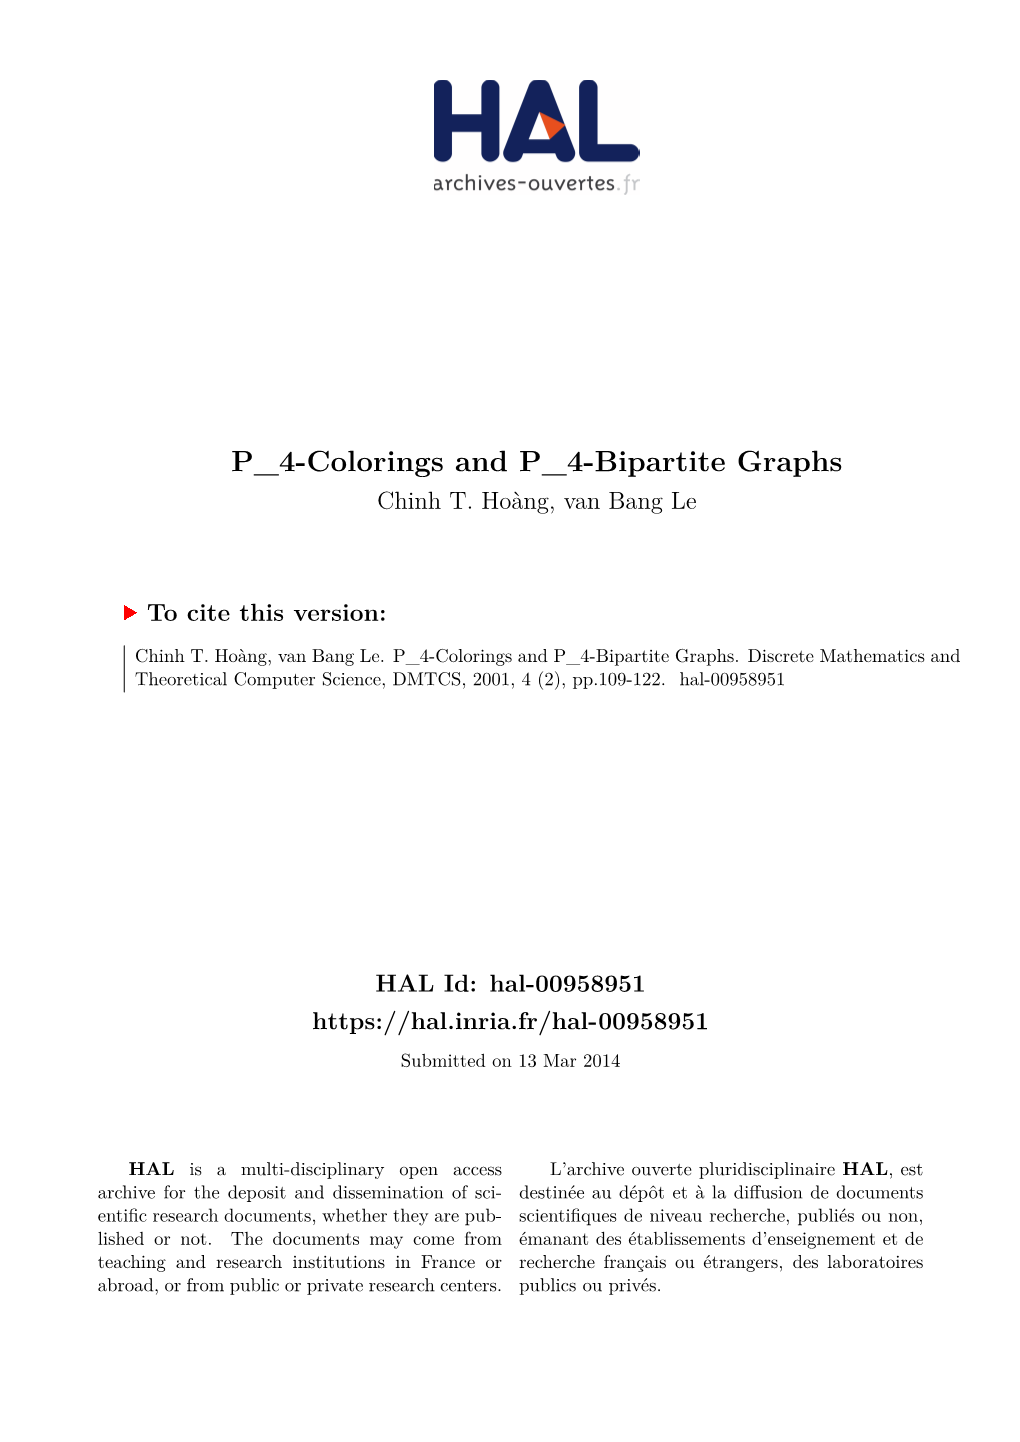 P 4-Colorings and P 4-Bipartite Graphs Chinh T